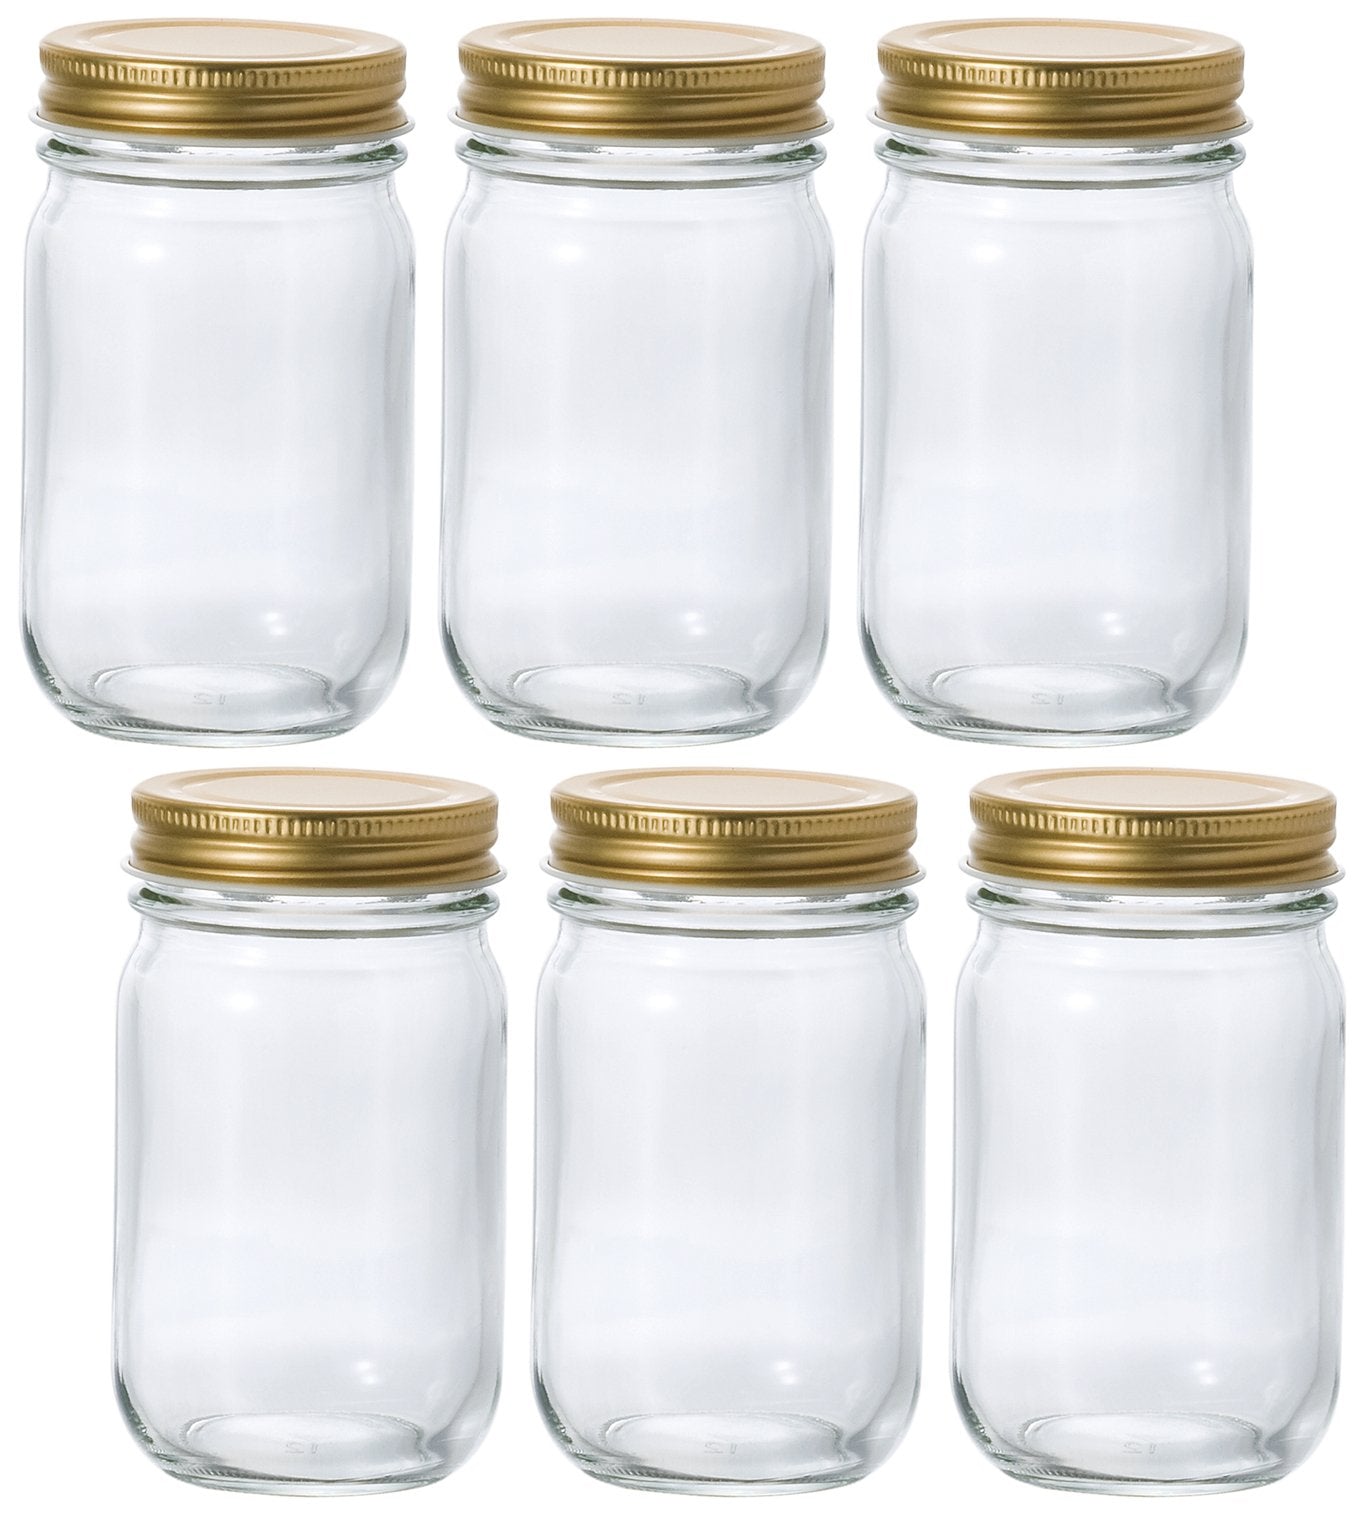 Aderia Glass Canister Set - 6 Japan-Made Airtight Storage Containers